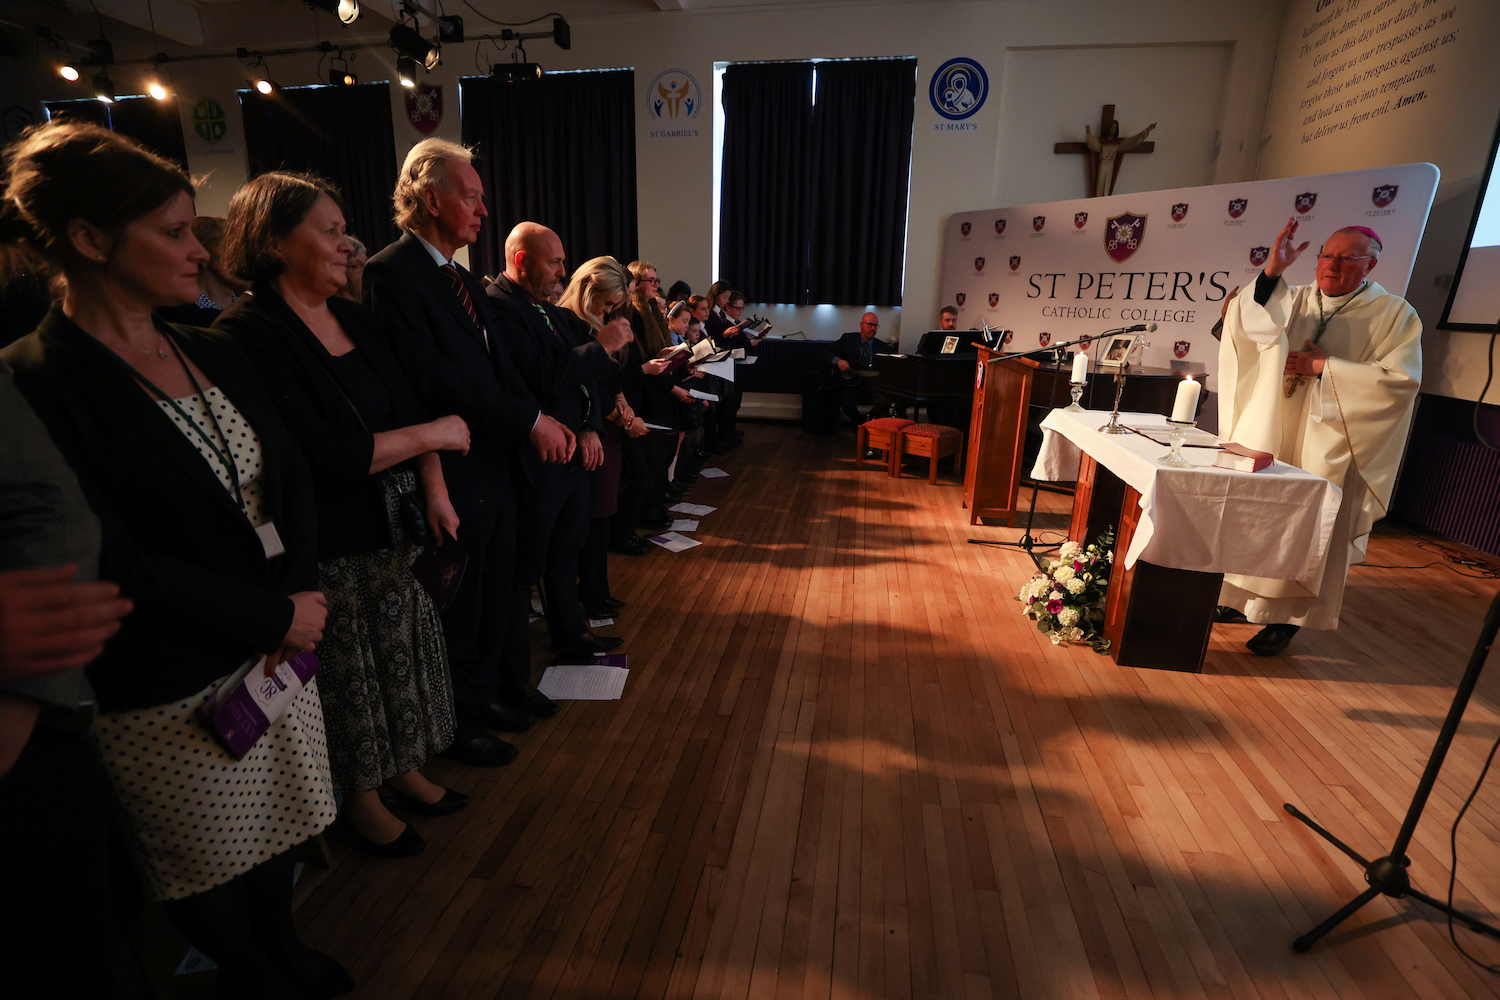 Bishop Terry gives the blessing at the end of Mass during the day of celebrations for St Peter’s Catholic College’s 80th birthday – Photo by Chris Booth